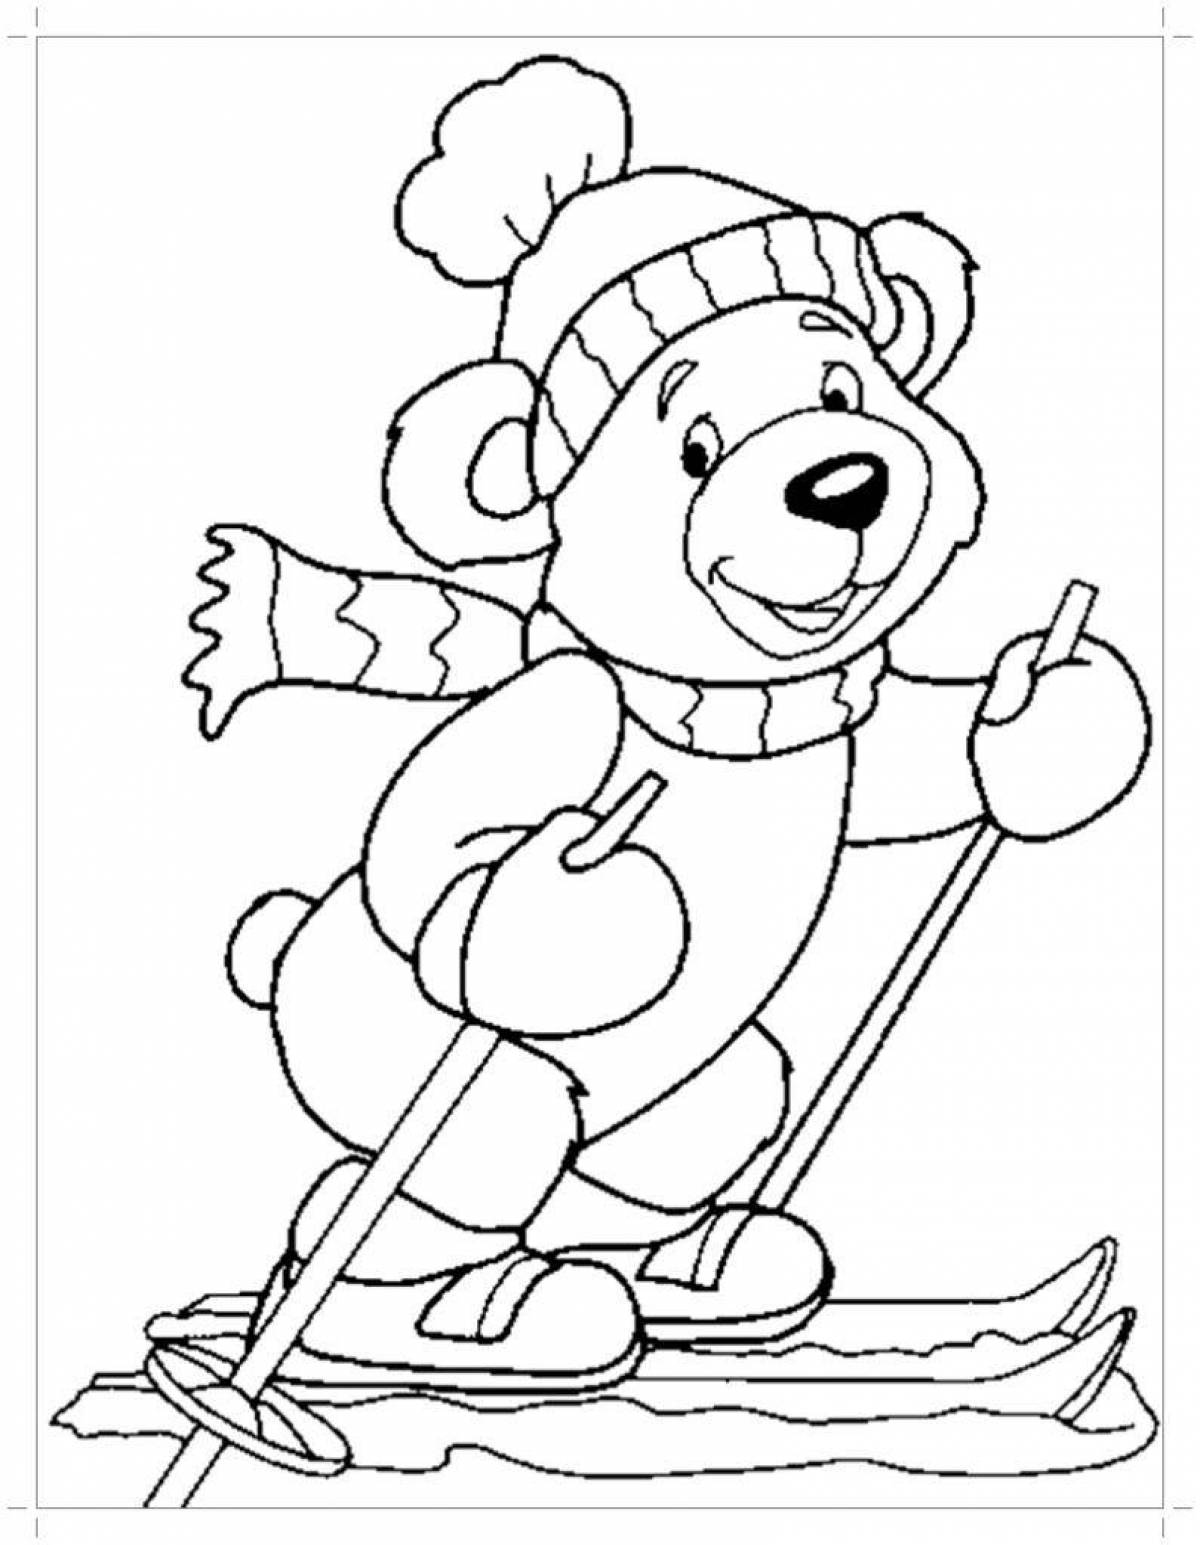 Live coloring for children 3 years old winter